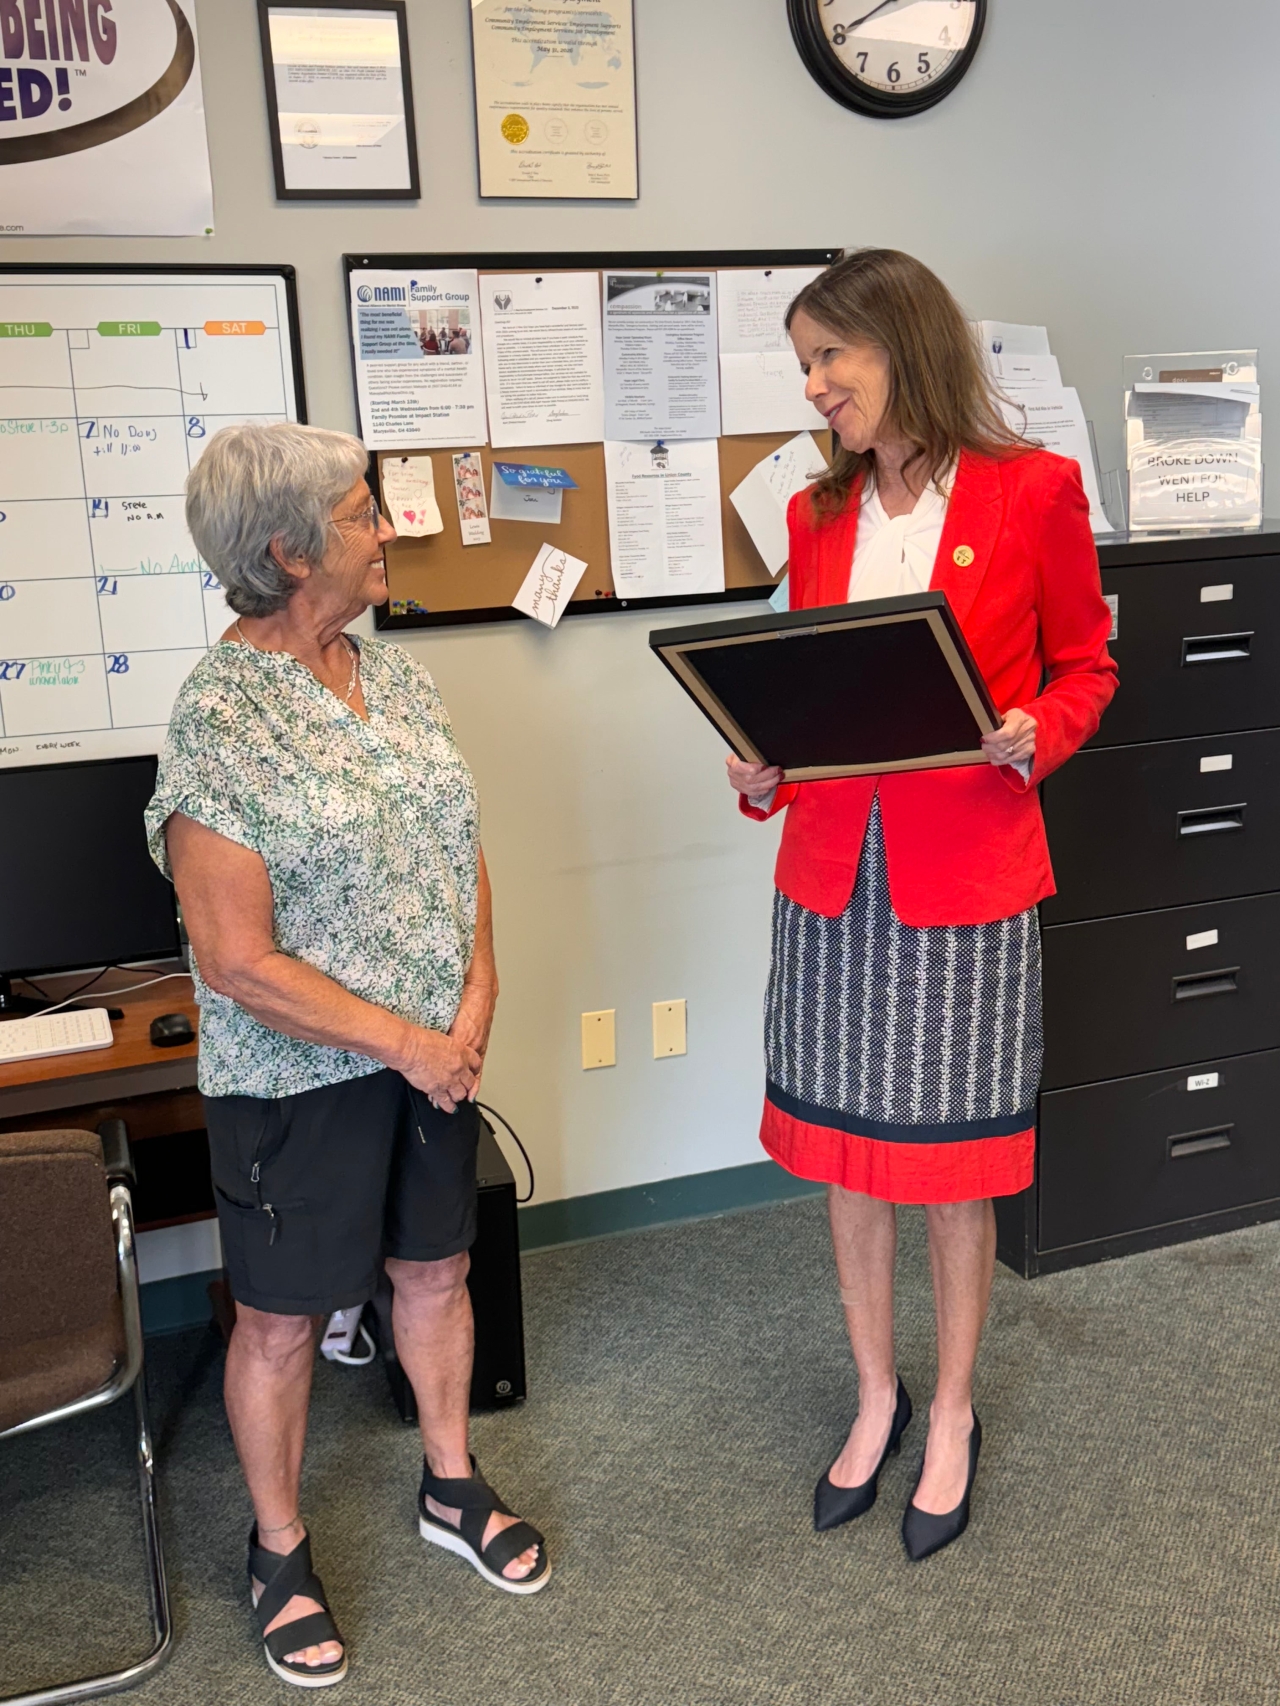 Representative Richardson presented Penny Wood with a commendation for the innovative transportation services she provides to the residents of Marysville.